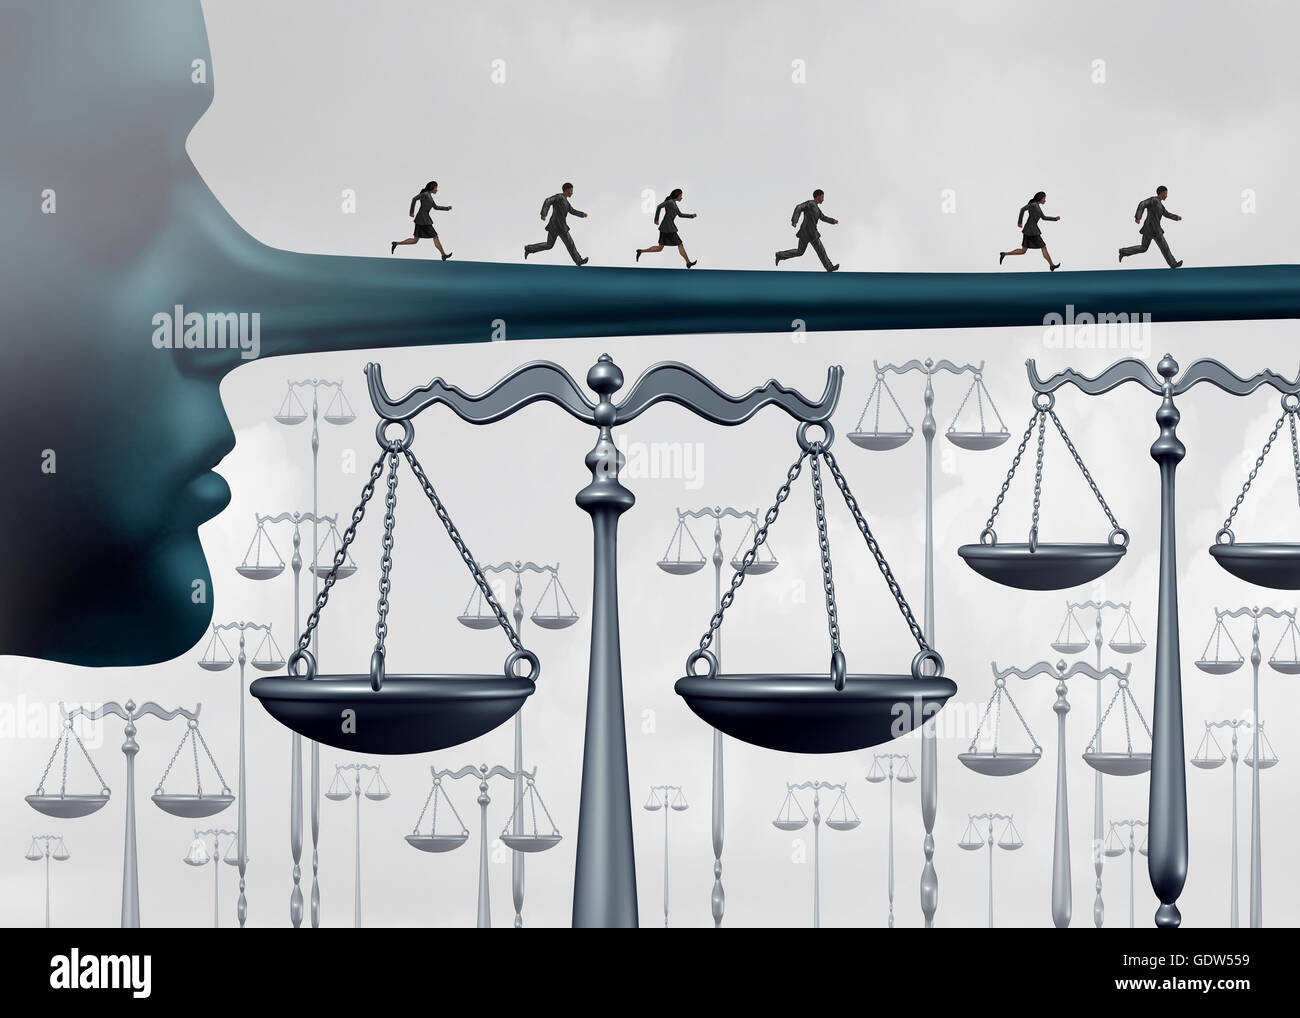 Above the law and unfair advantages concept or committing perjury symbol as a group of culprits escaping justice by running on a long liar nose over law scales as a rigged system metaphor for corruption and fraud or lack of integrity with 3D illustration Stock Photo